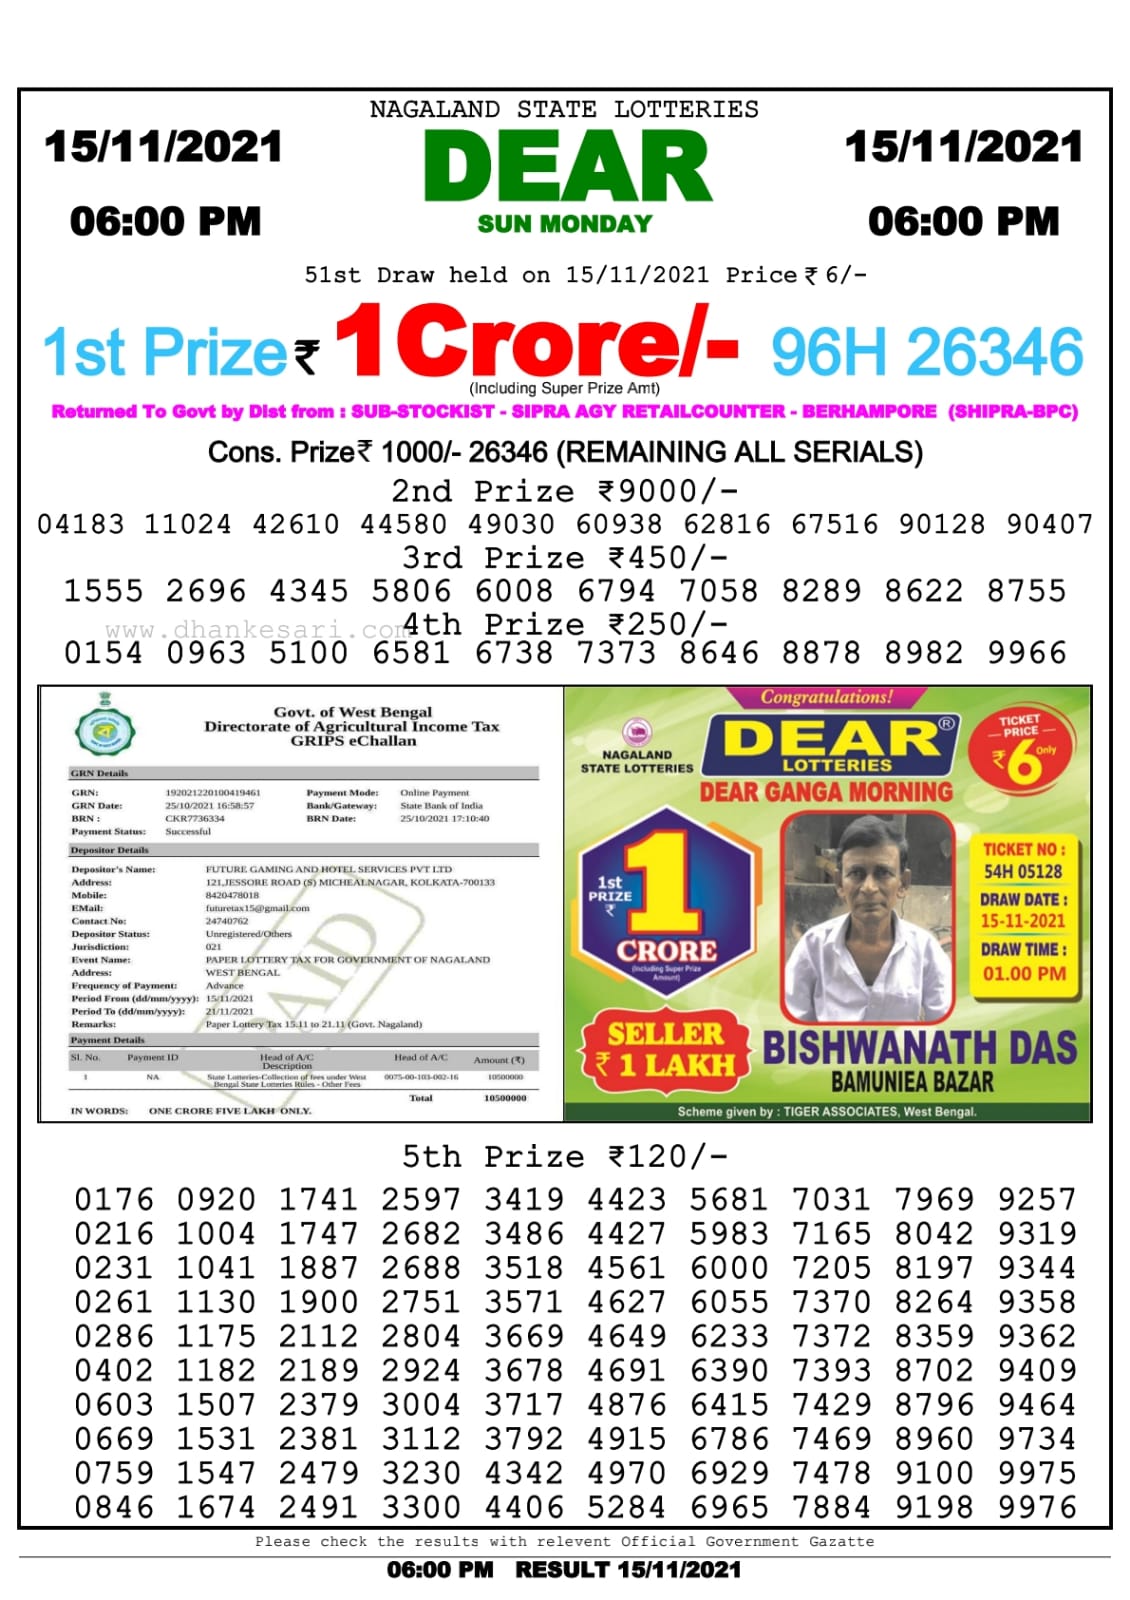 Dear Lottery Nagaland State Lottery Today 6:00 PM 15-11-2021